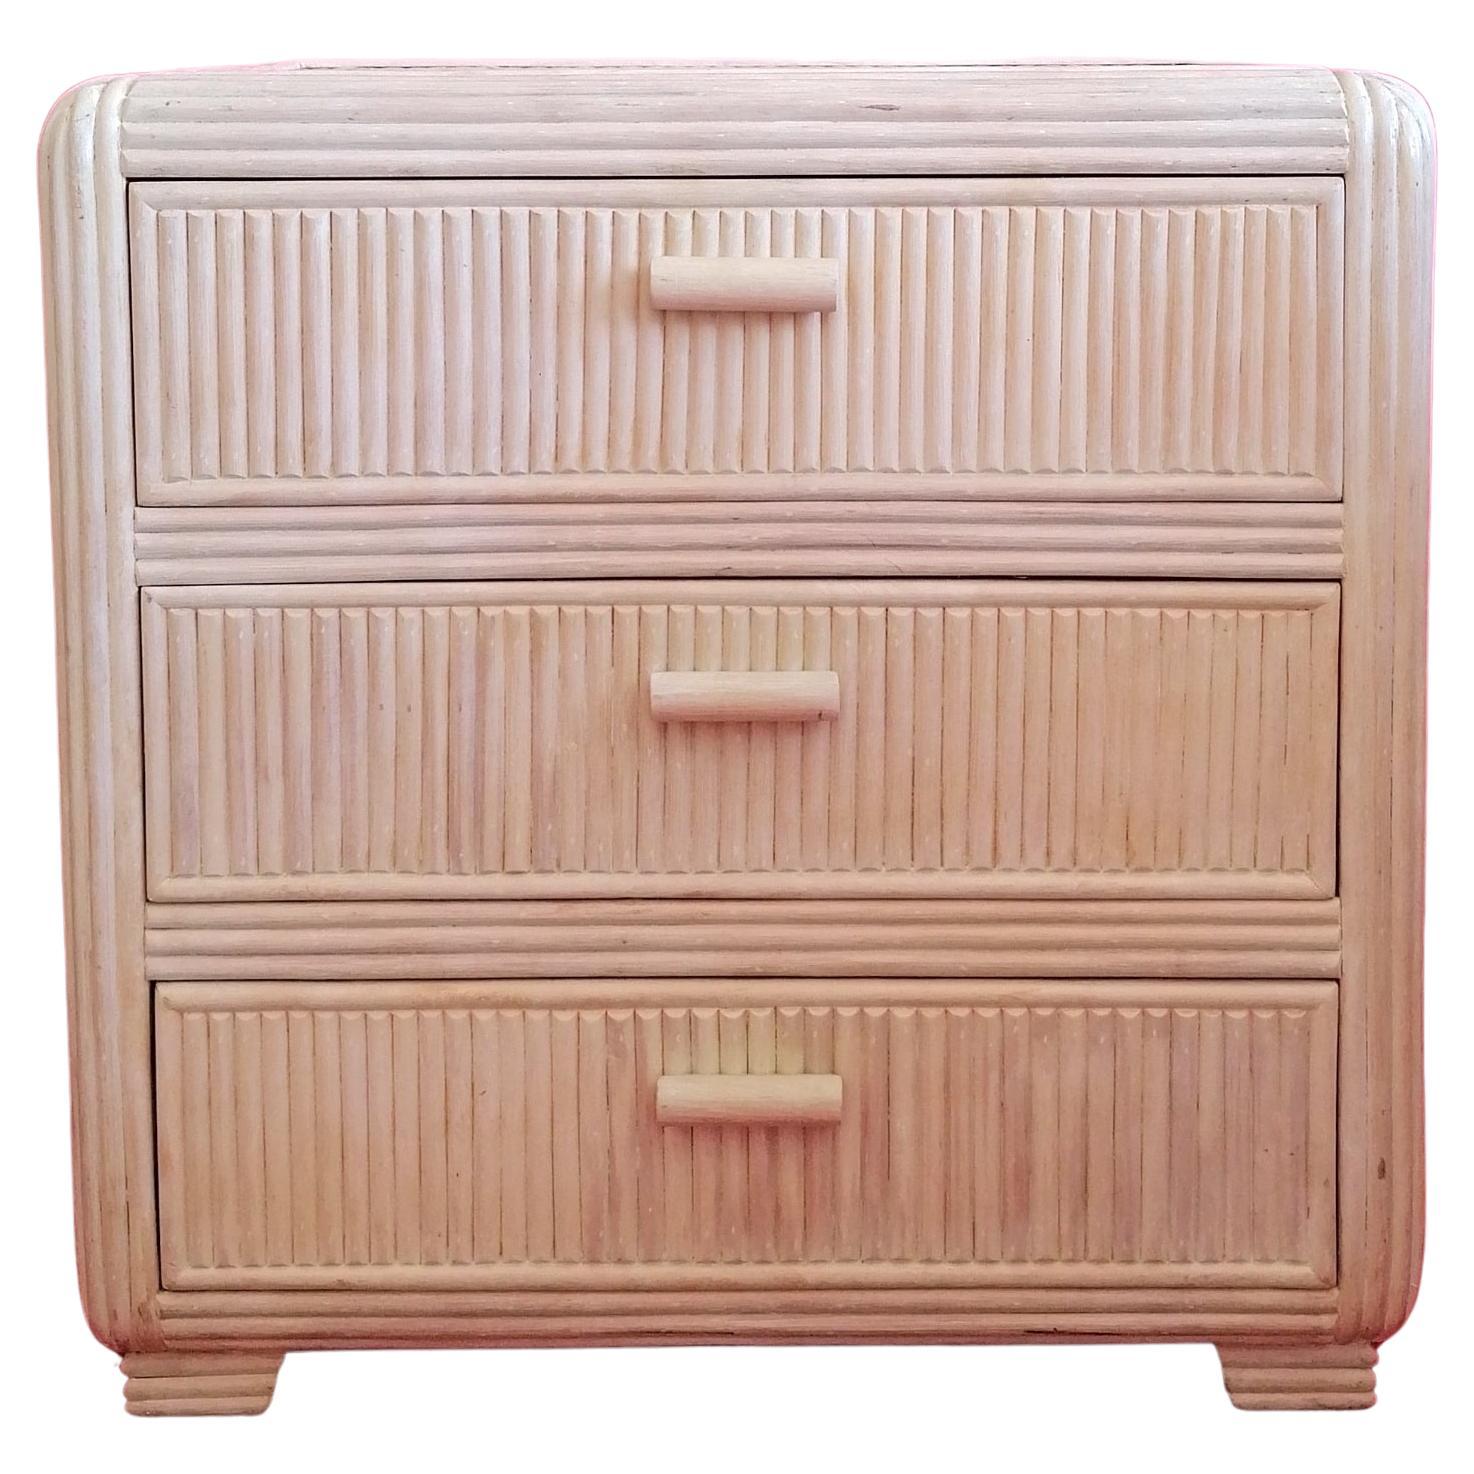 Vintage American cane chest of drawers with rattan top, 1970s